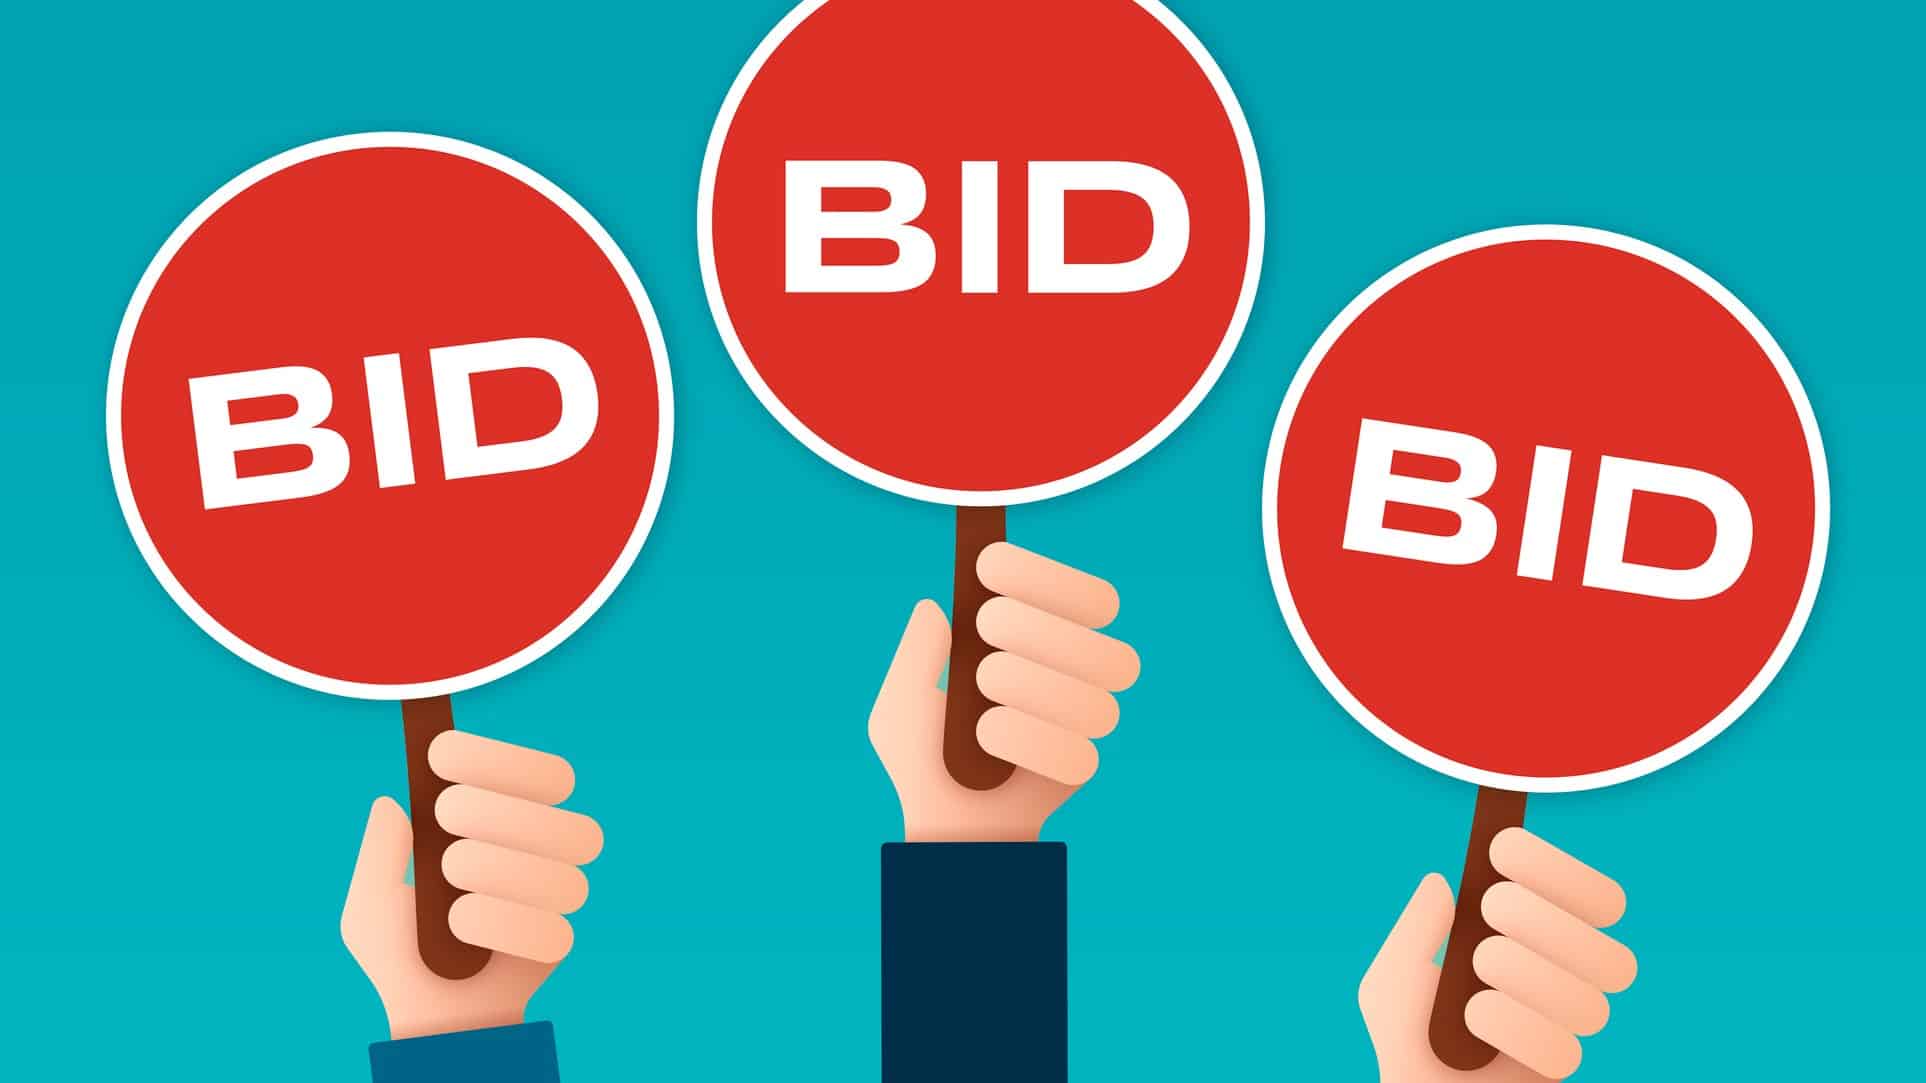 A graphic showing three hands holding red paddles with the word BID, indicating a bidding war for an ASX share company